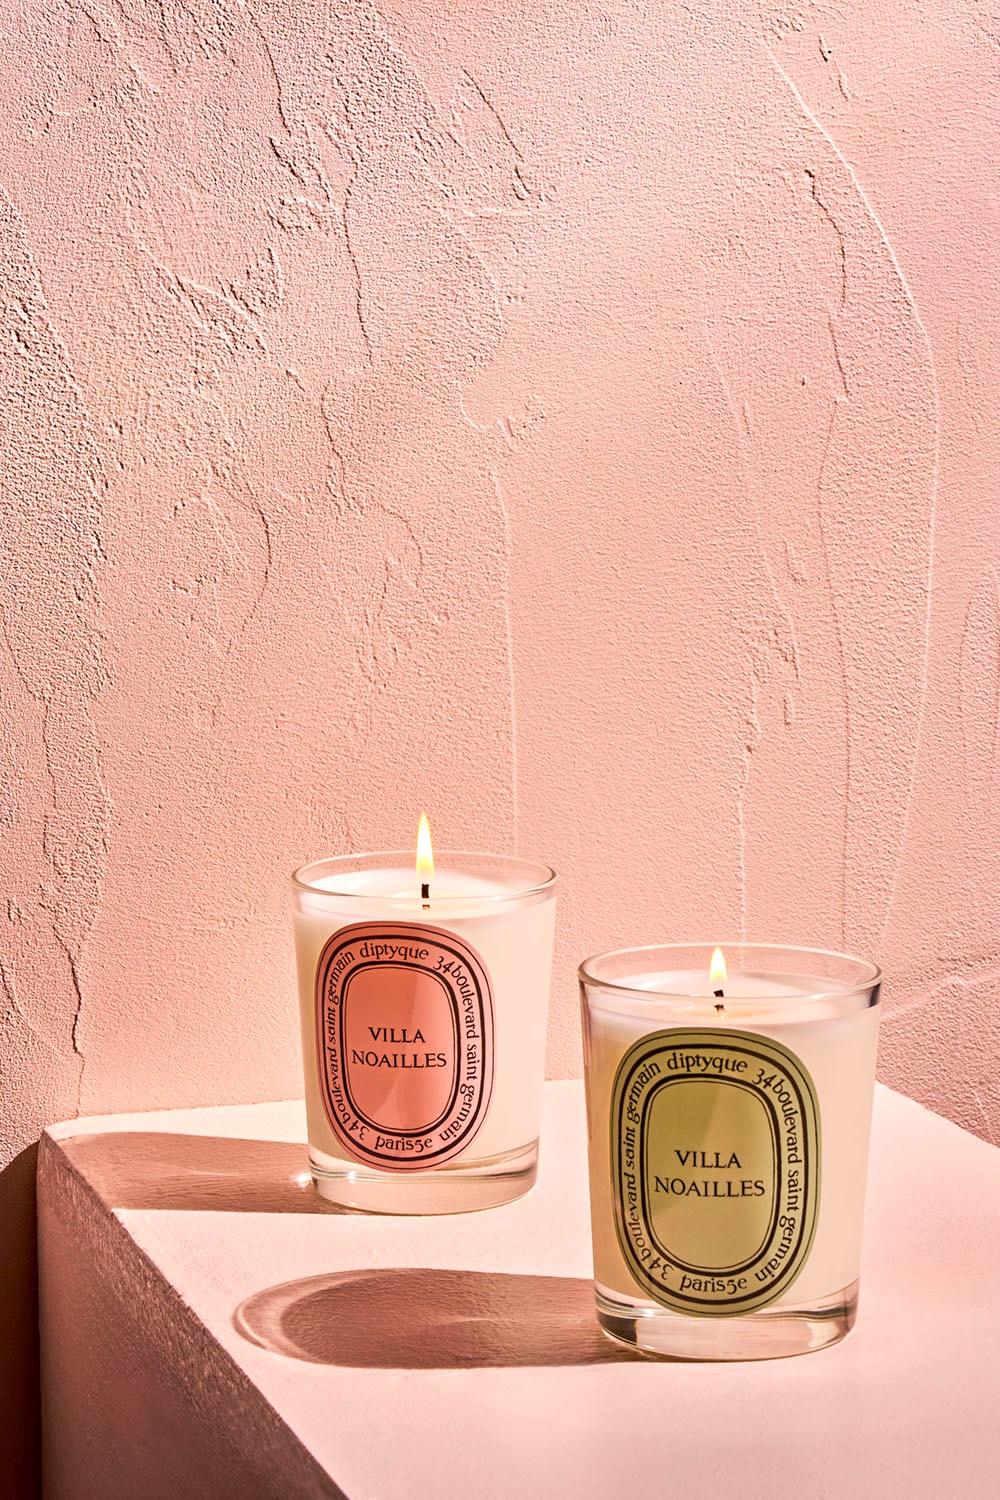 Diptyque Villa Noailles Limited-Edition Candles